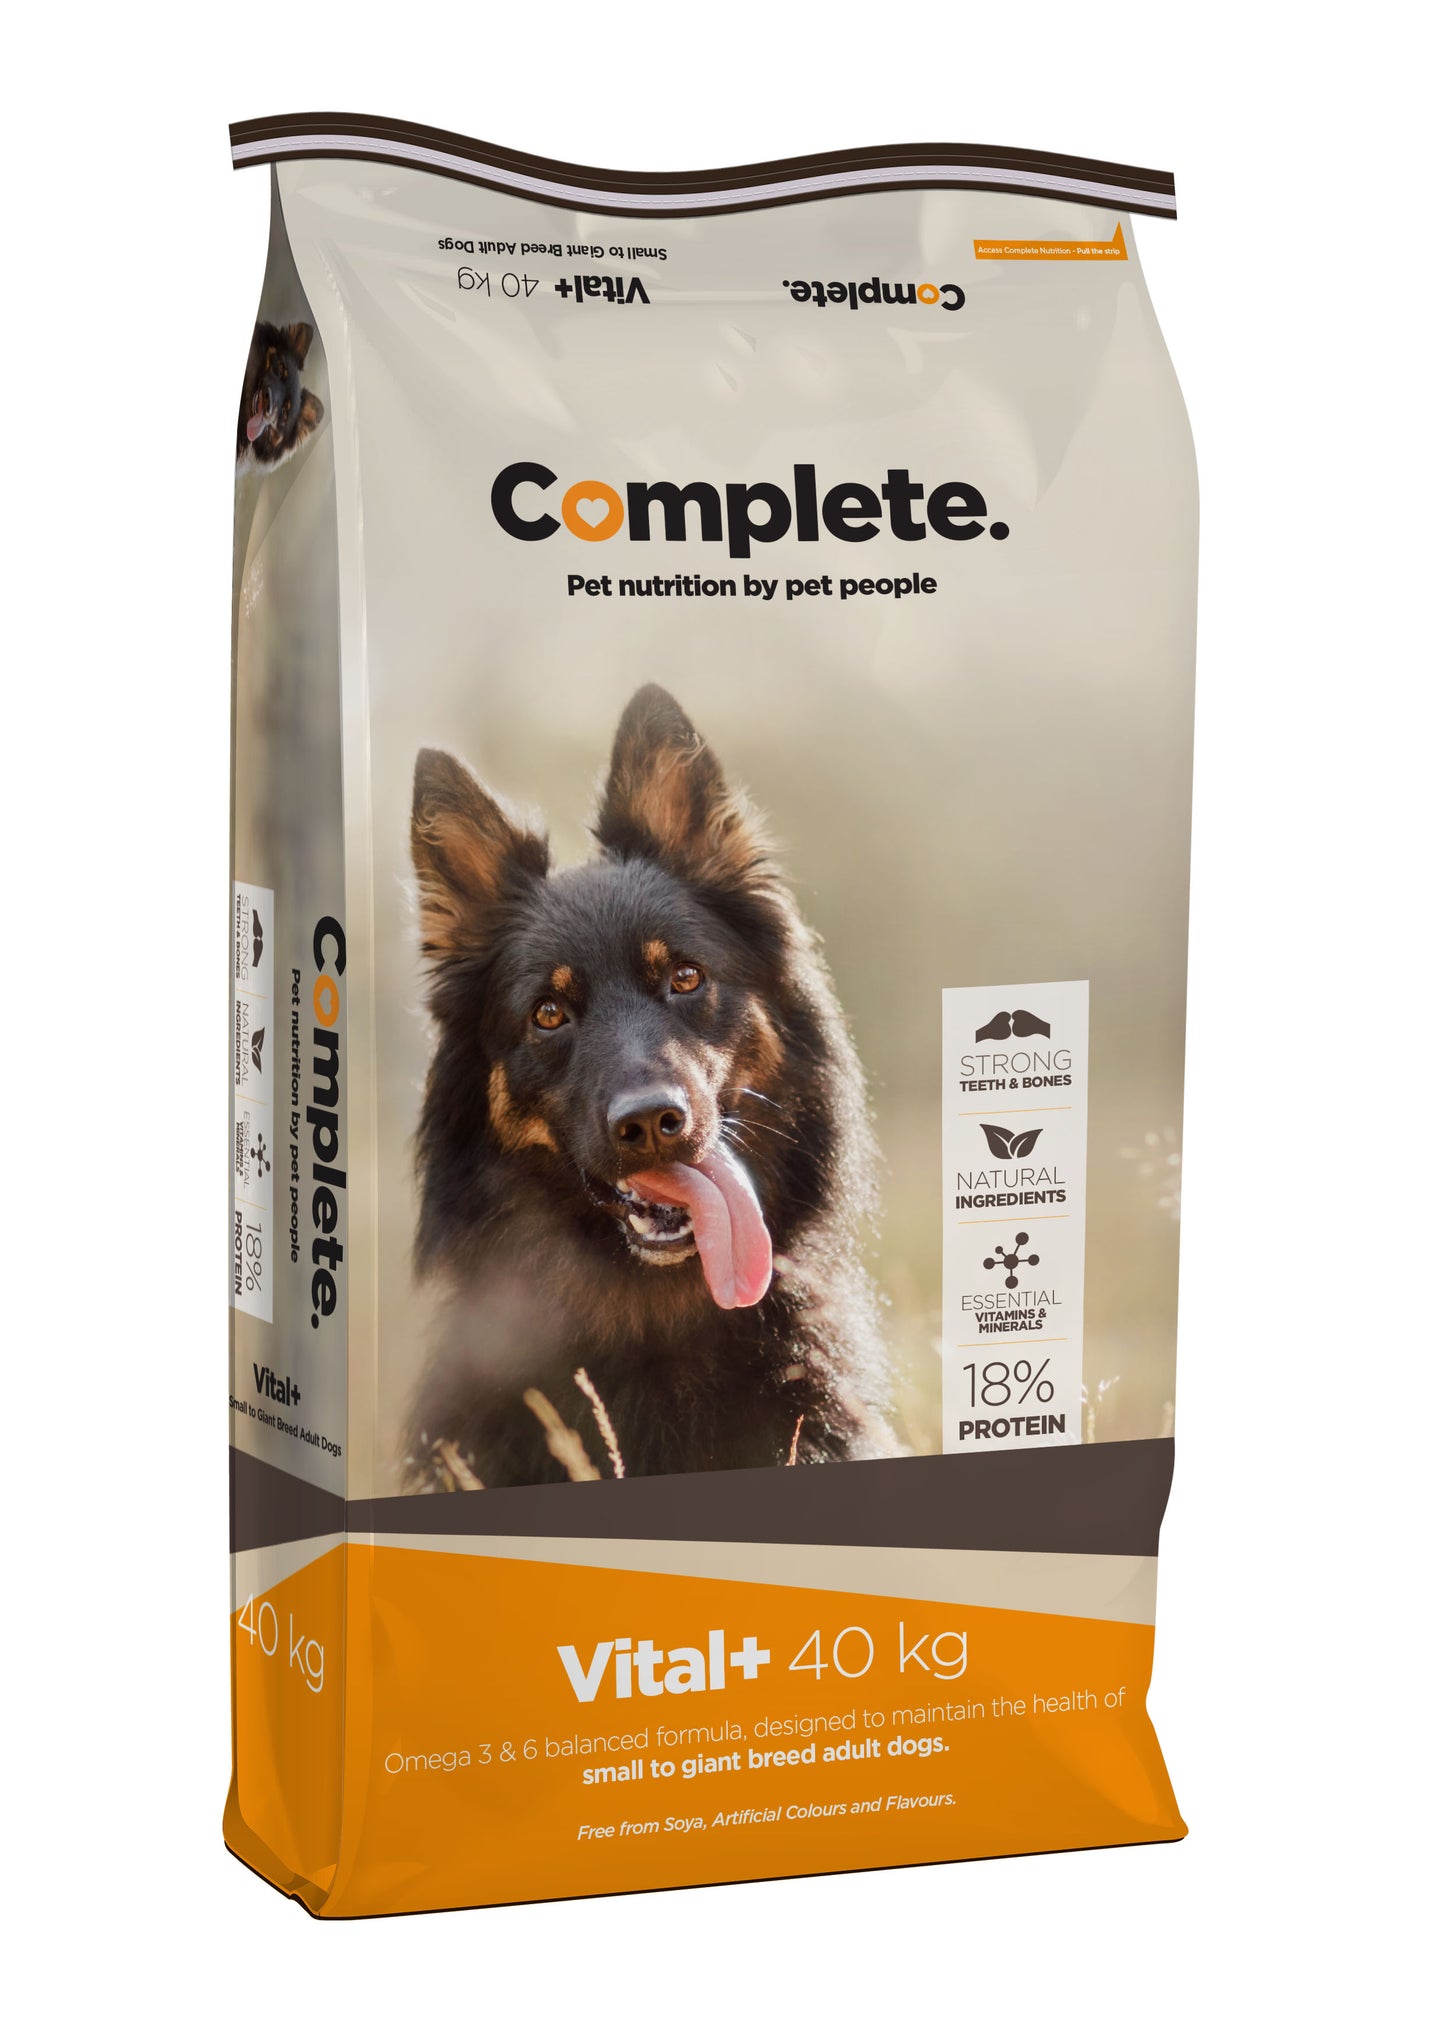 Vital+ 40kg Complete Pet Food For Large & Giant breed adult dogs from Pets Planet - South Africa’s No.1 Online Pet Store for premium pet products, best pet store near me, Dog food, pet food, dog wet food, dog bed, dog beds, washable dog bed, takealot dog bed, plush dog bed, Complete Pet Nutrition, Complete pet nutrition dog food, hills dog food, optimizor dog food, royal canin dog food, jock dog food, bobtail dog food, canine cuisine, acana dog food, best dog food, dog food near me, best dog food brands